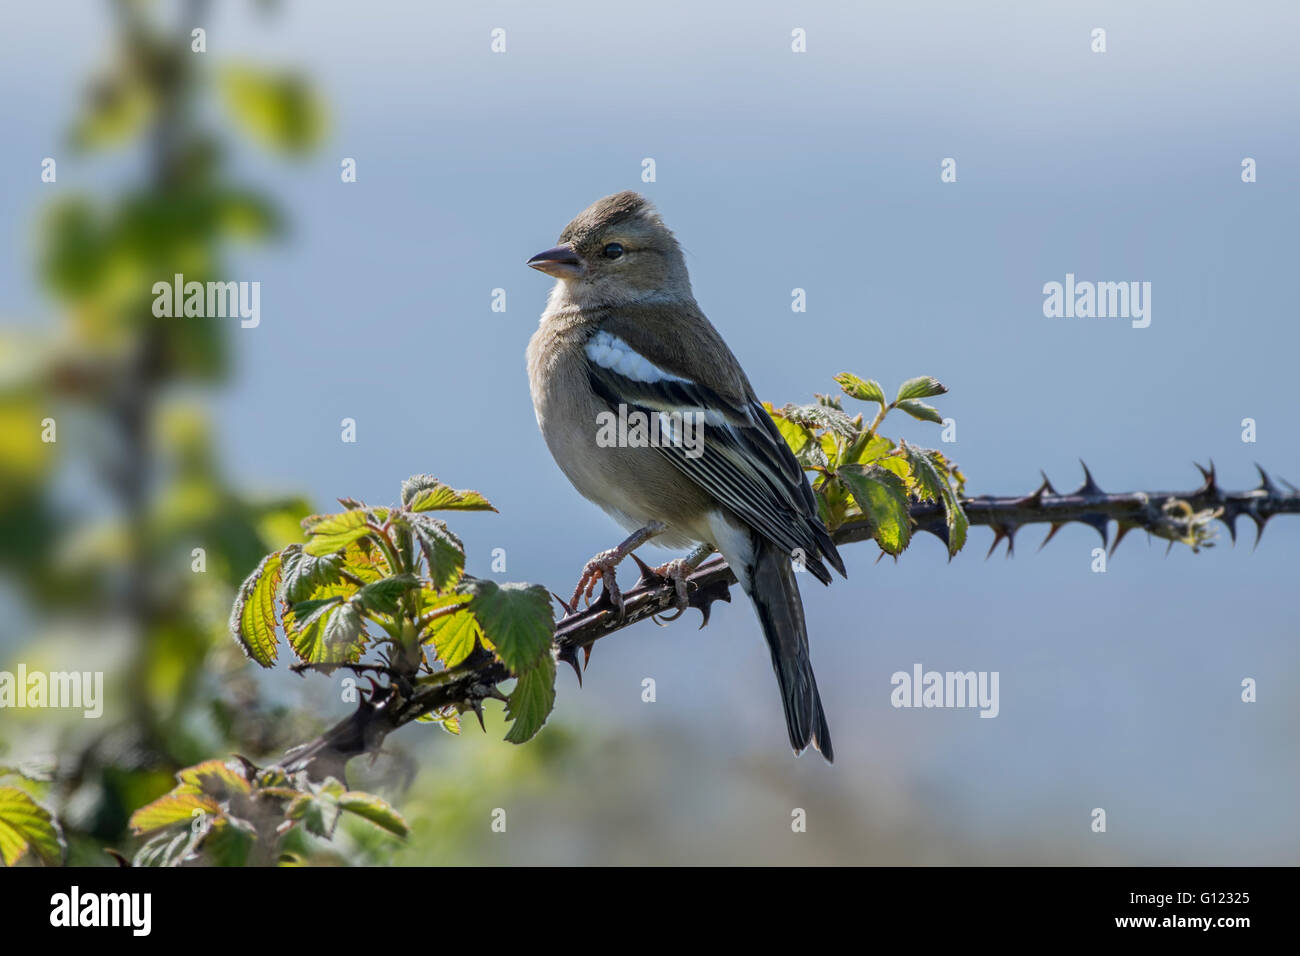 Female chaffinch perched on a thorny bramble branch Stock Photo